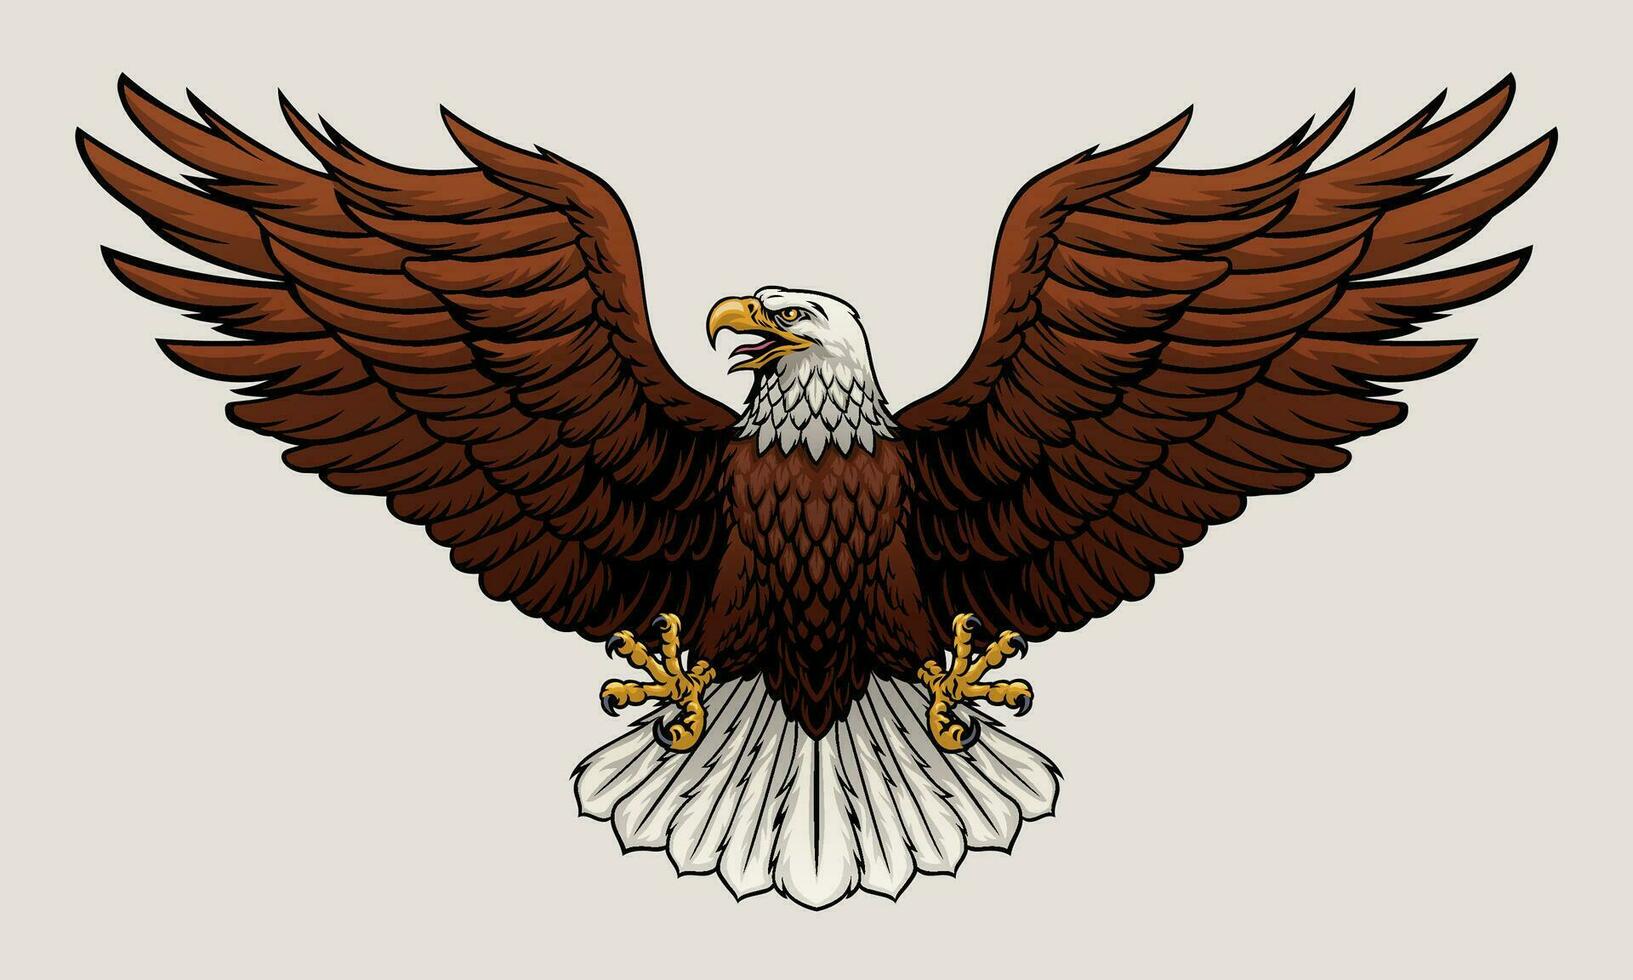 Bald Eagle Spread the Wing Vector Illustration